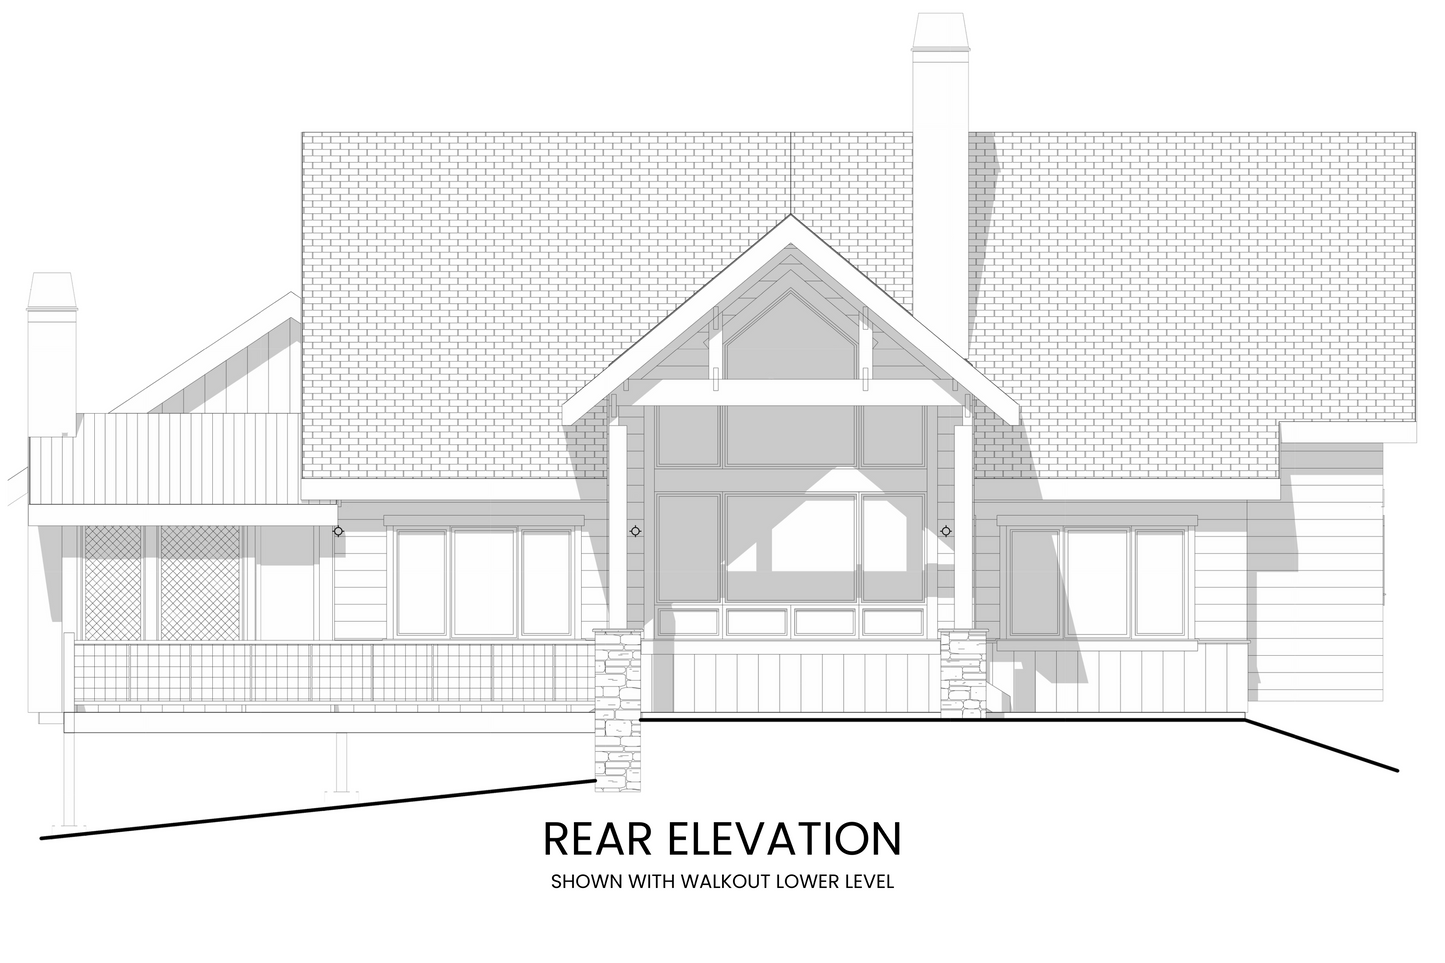 Cabin-Plan-with-Front-Porch-for-Sites-with-a-Rear-View-Rear-Elevation-Rocky-Mountain-Plan-Company-Lake-Agnes